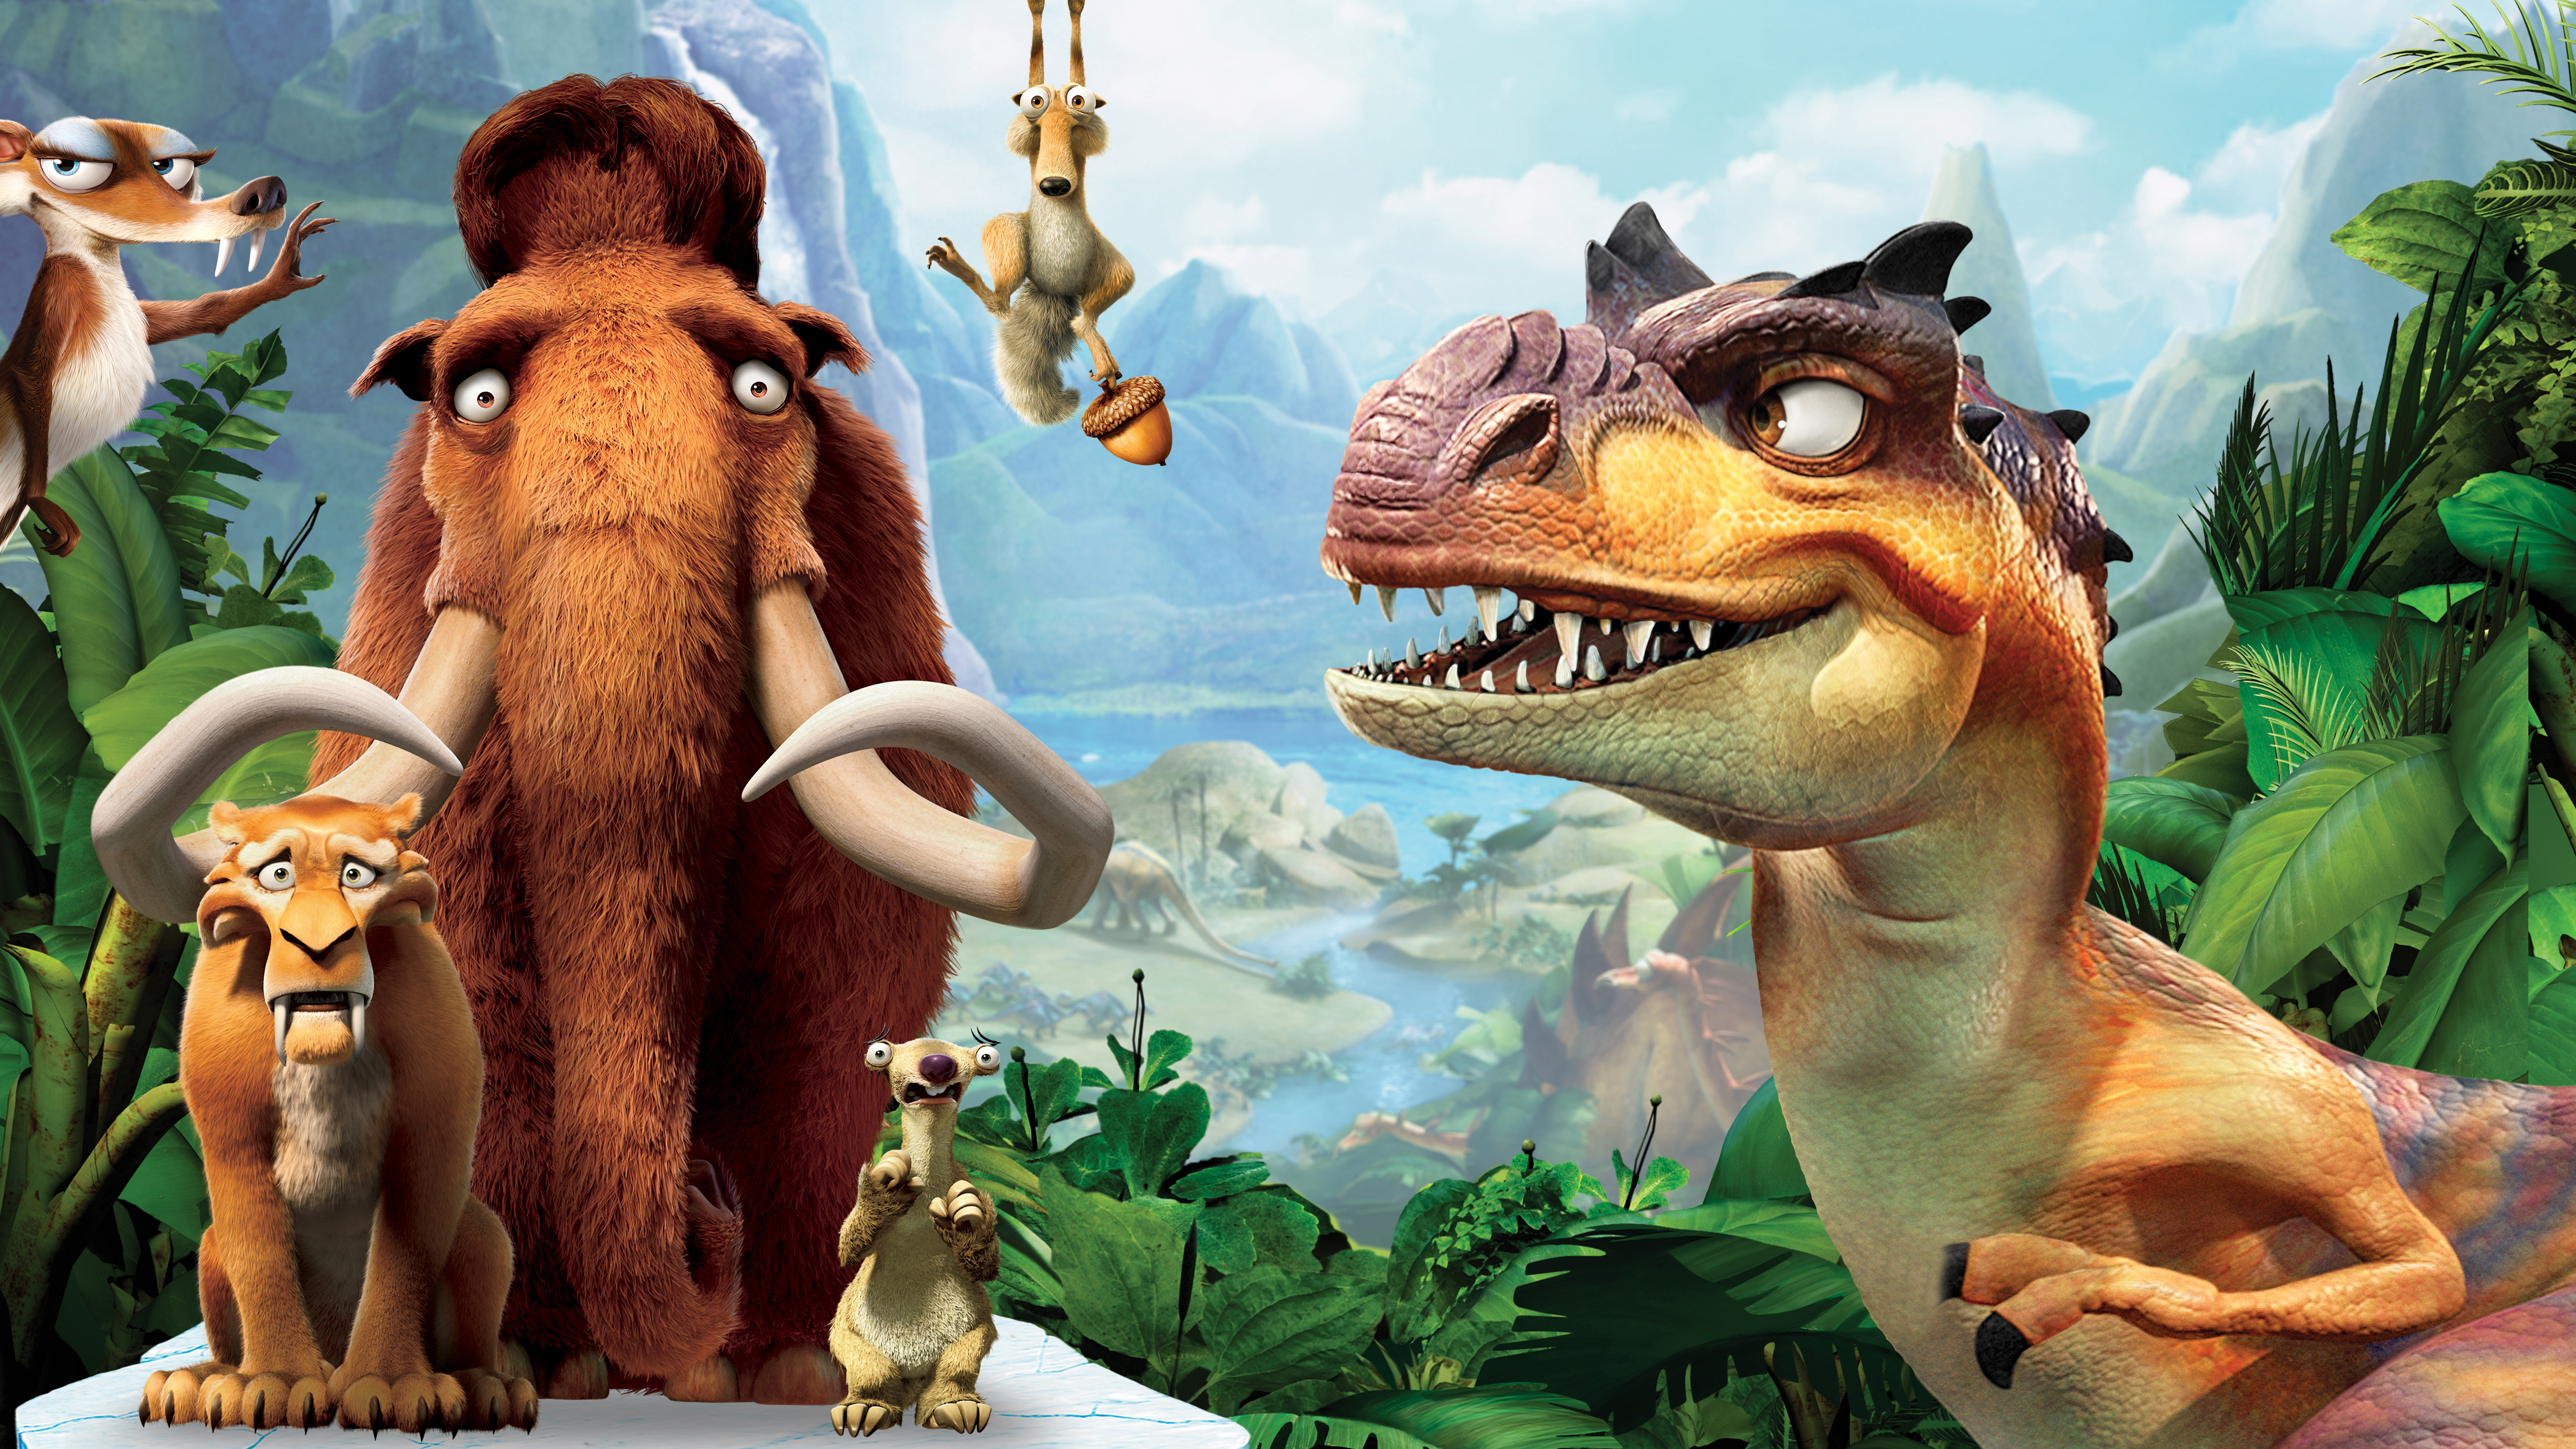 Ice Age: Dawn Of The Dinosaurs Wallpapers